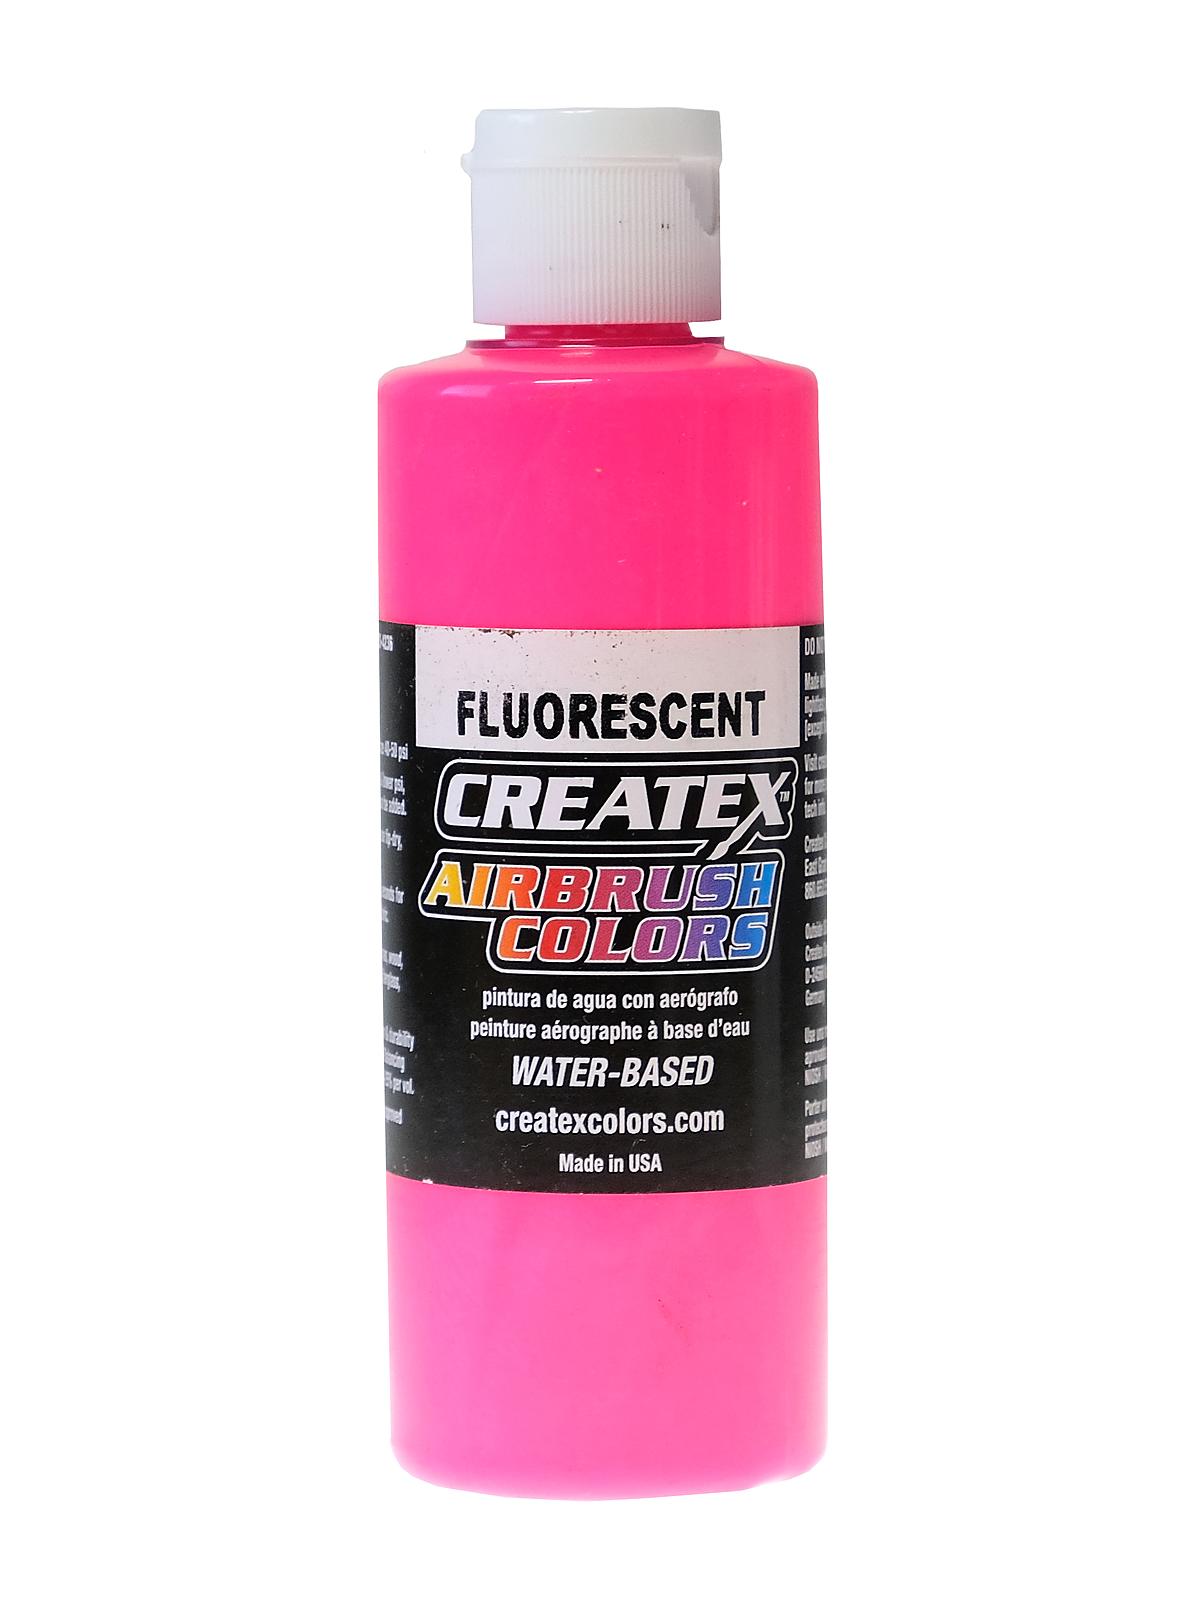 Airbrush Colors Fluorescent Pink 4 Oz.